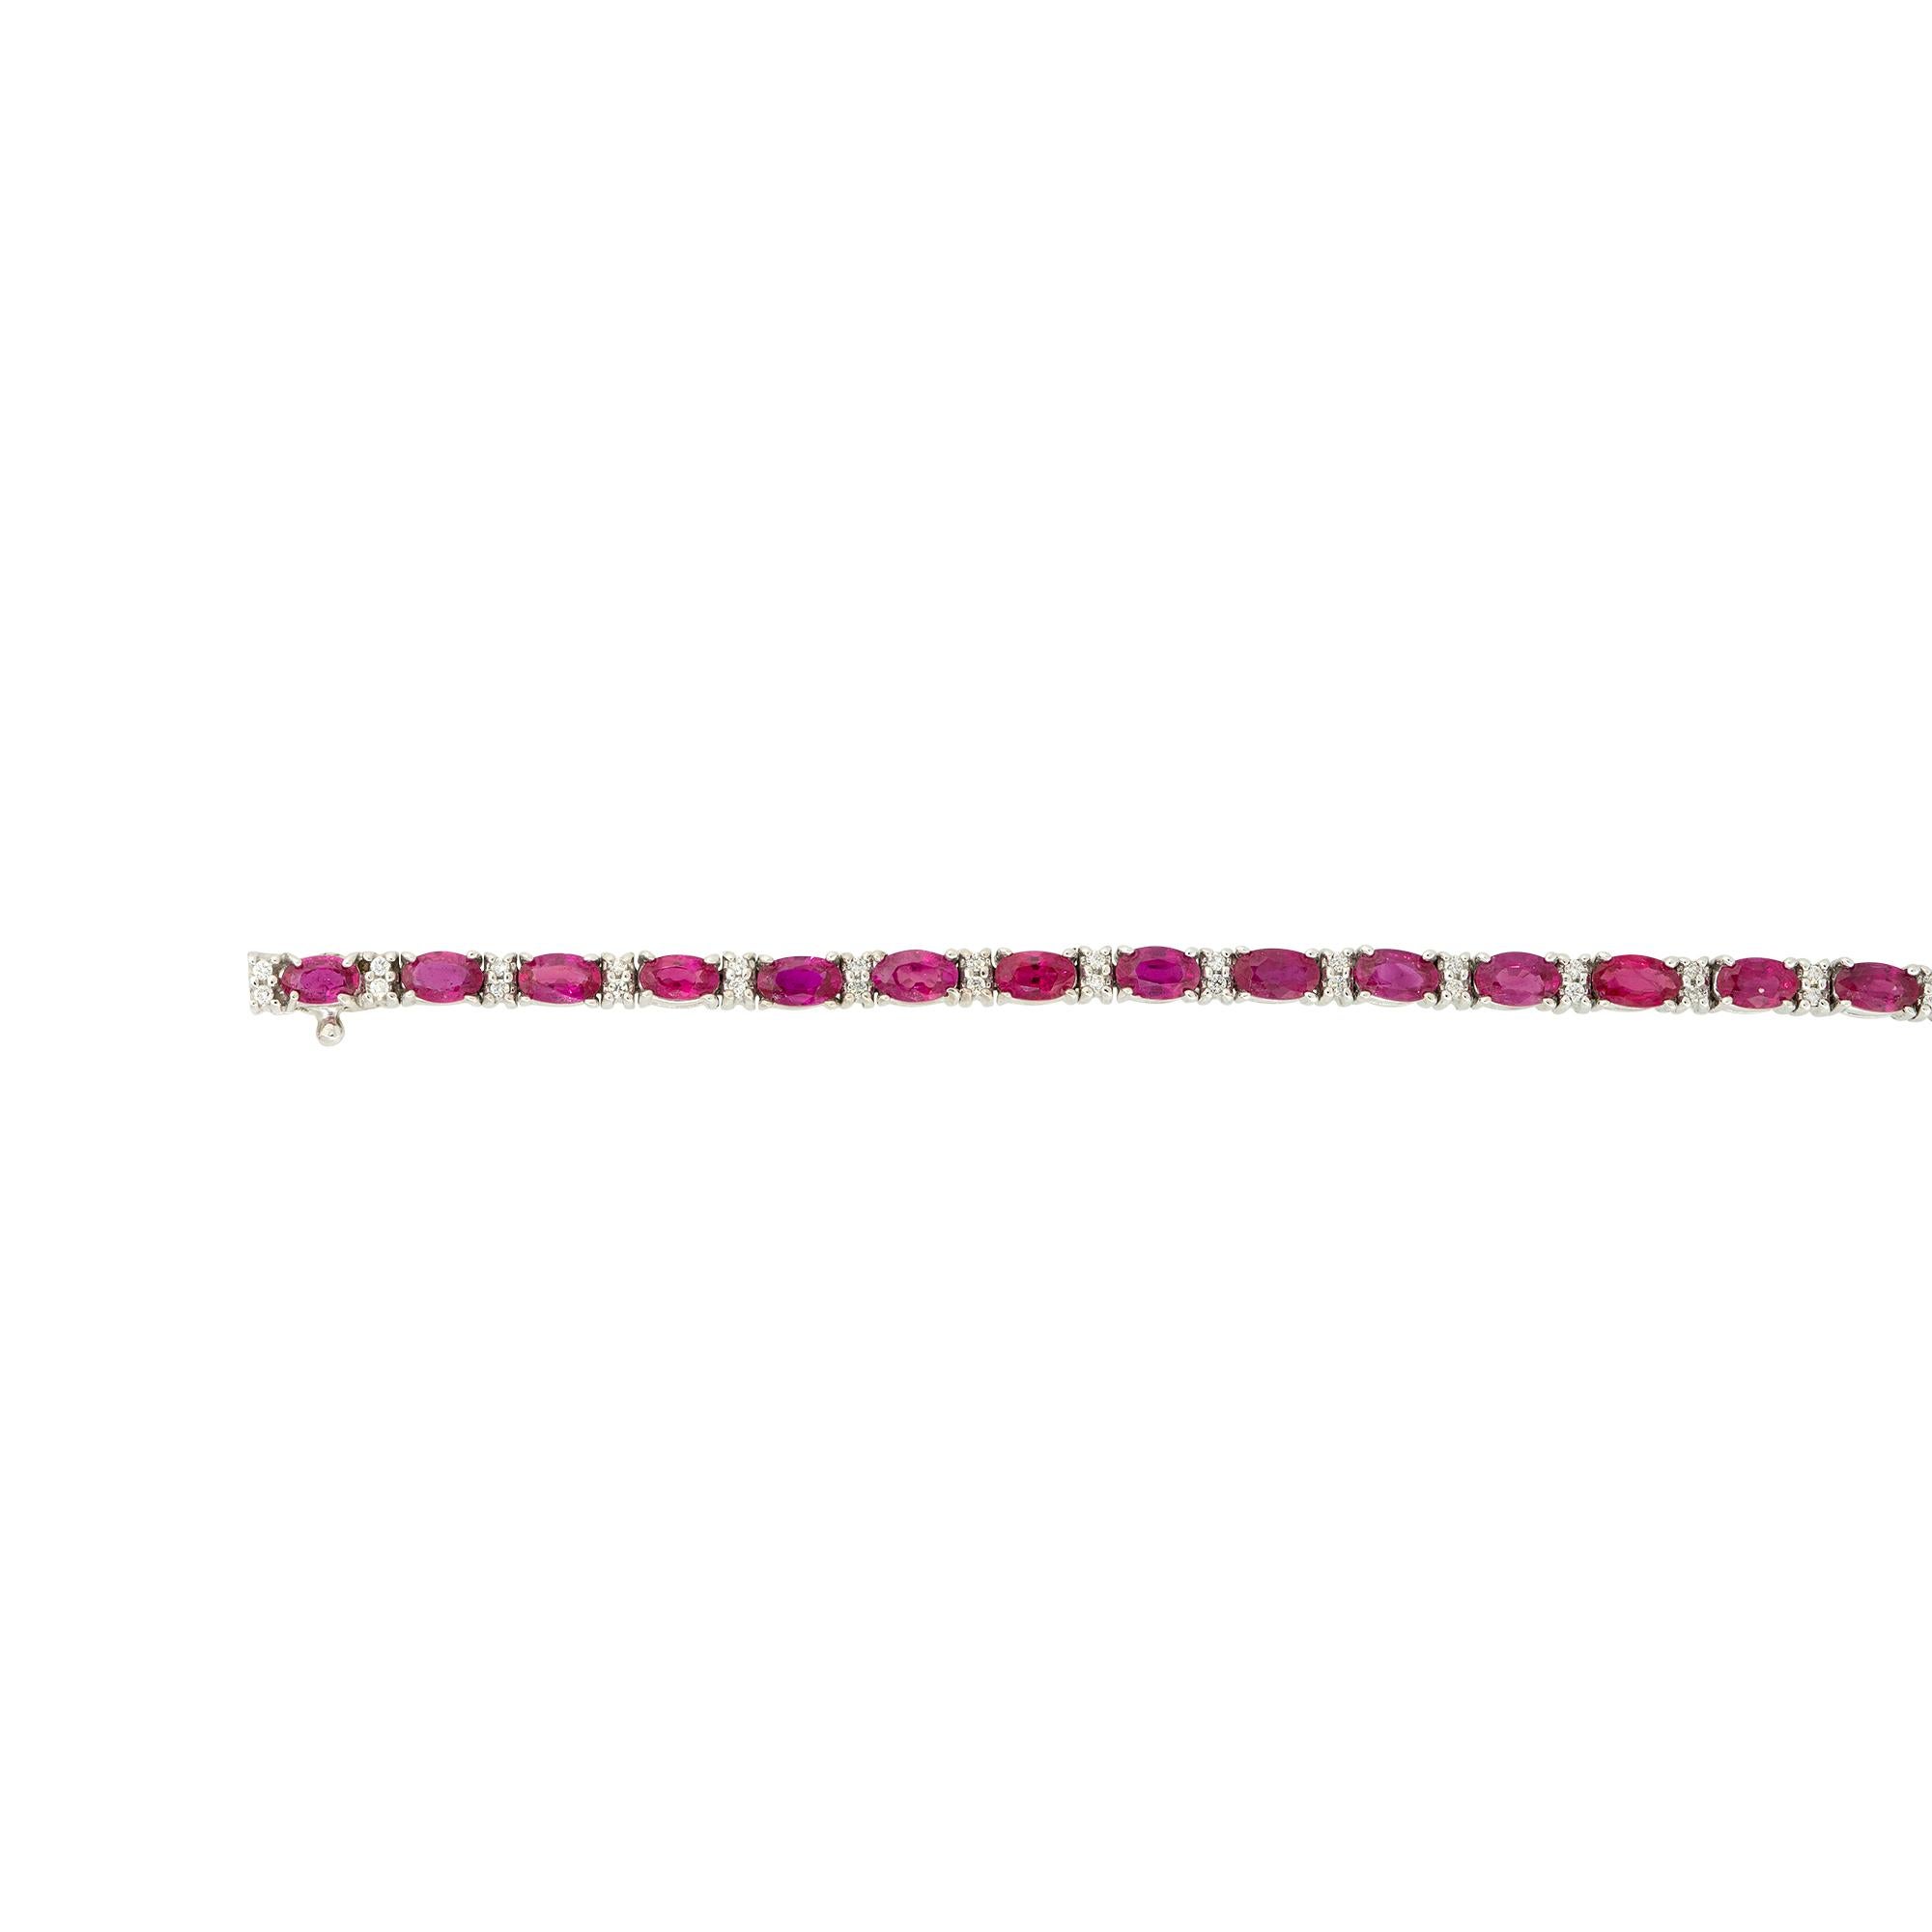 18k White Gold 7.45ctw Oval Ruby and Diamond Tennis Bracelet

Material: 18k White Gold
Gemstone Details: Approximately 7.45ctw of Oval Cut Rubies
Diamond Details: Approximately 0.60ctw of Round Brilliant Diamonds
Clasps: Tongue in Box Clasp with